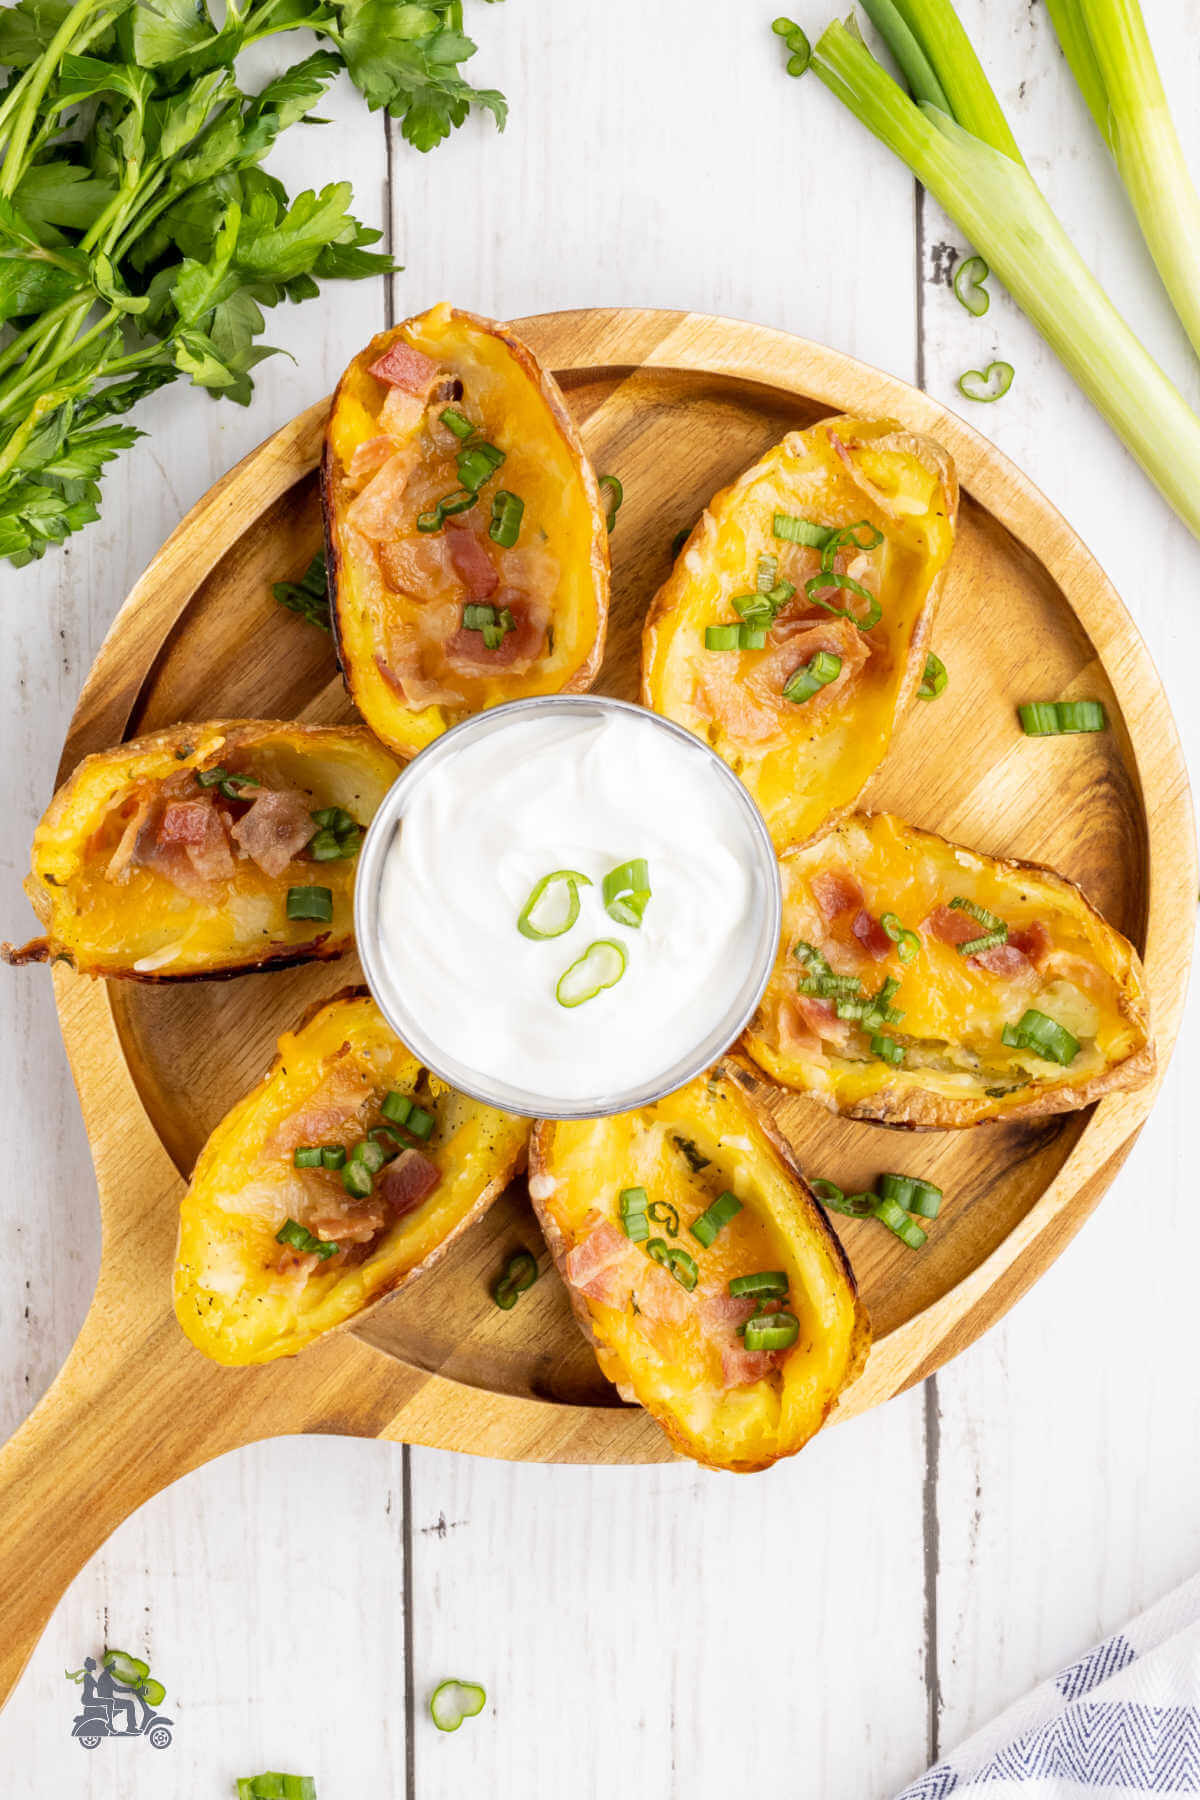 A wooden serving tray with crispy baked potato skins made with cheese, bacon and green onions.